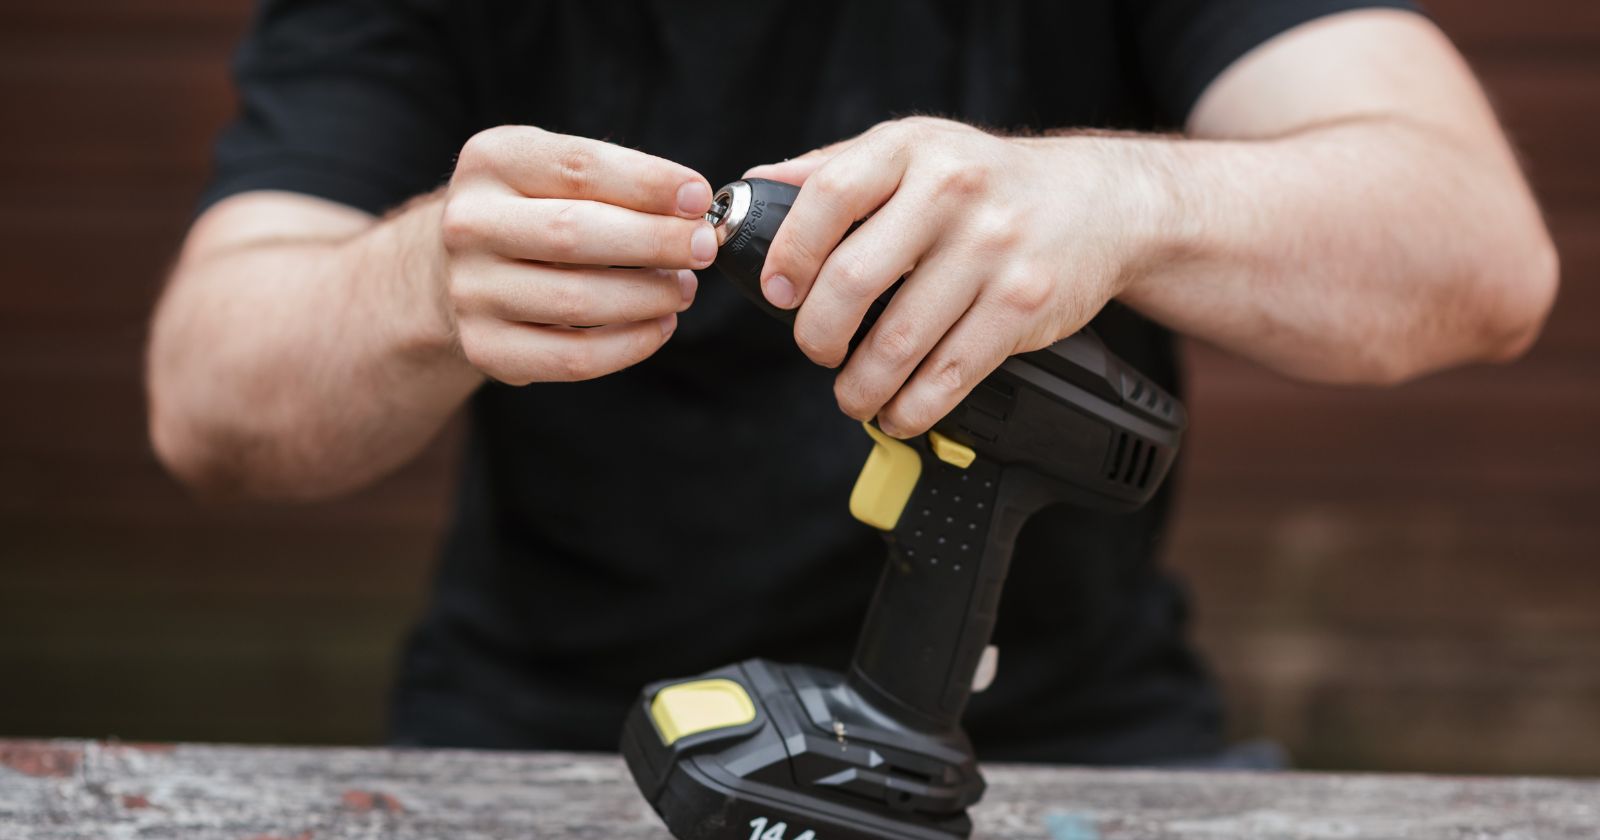 How To Put A Drill Bit On A Impact Driver Drill {In 4 Steps}